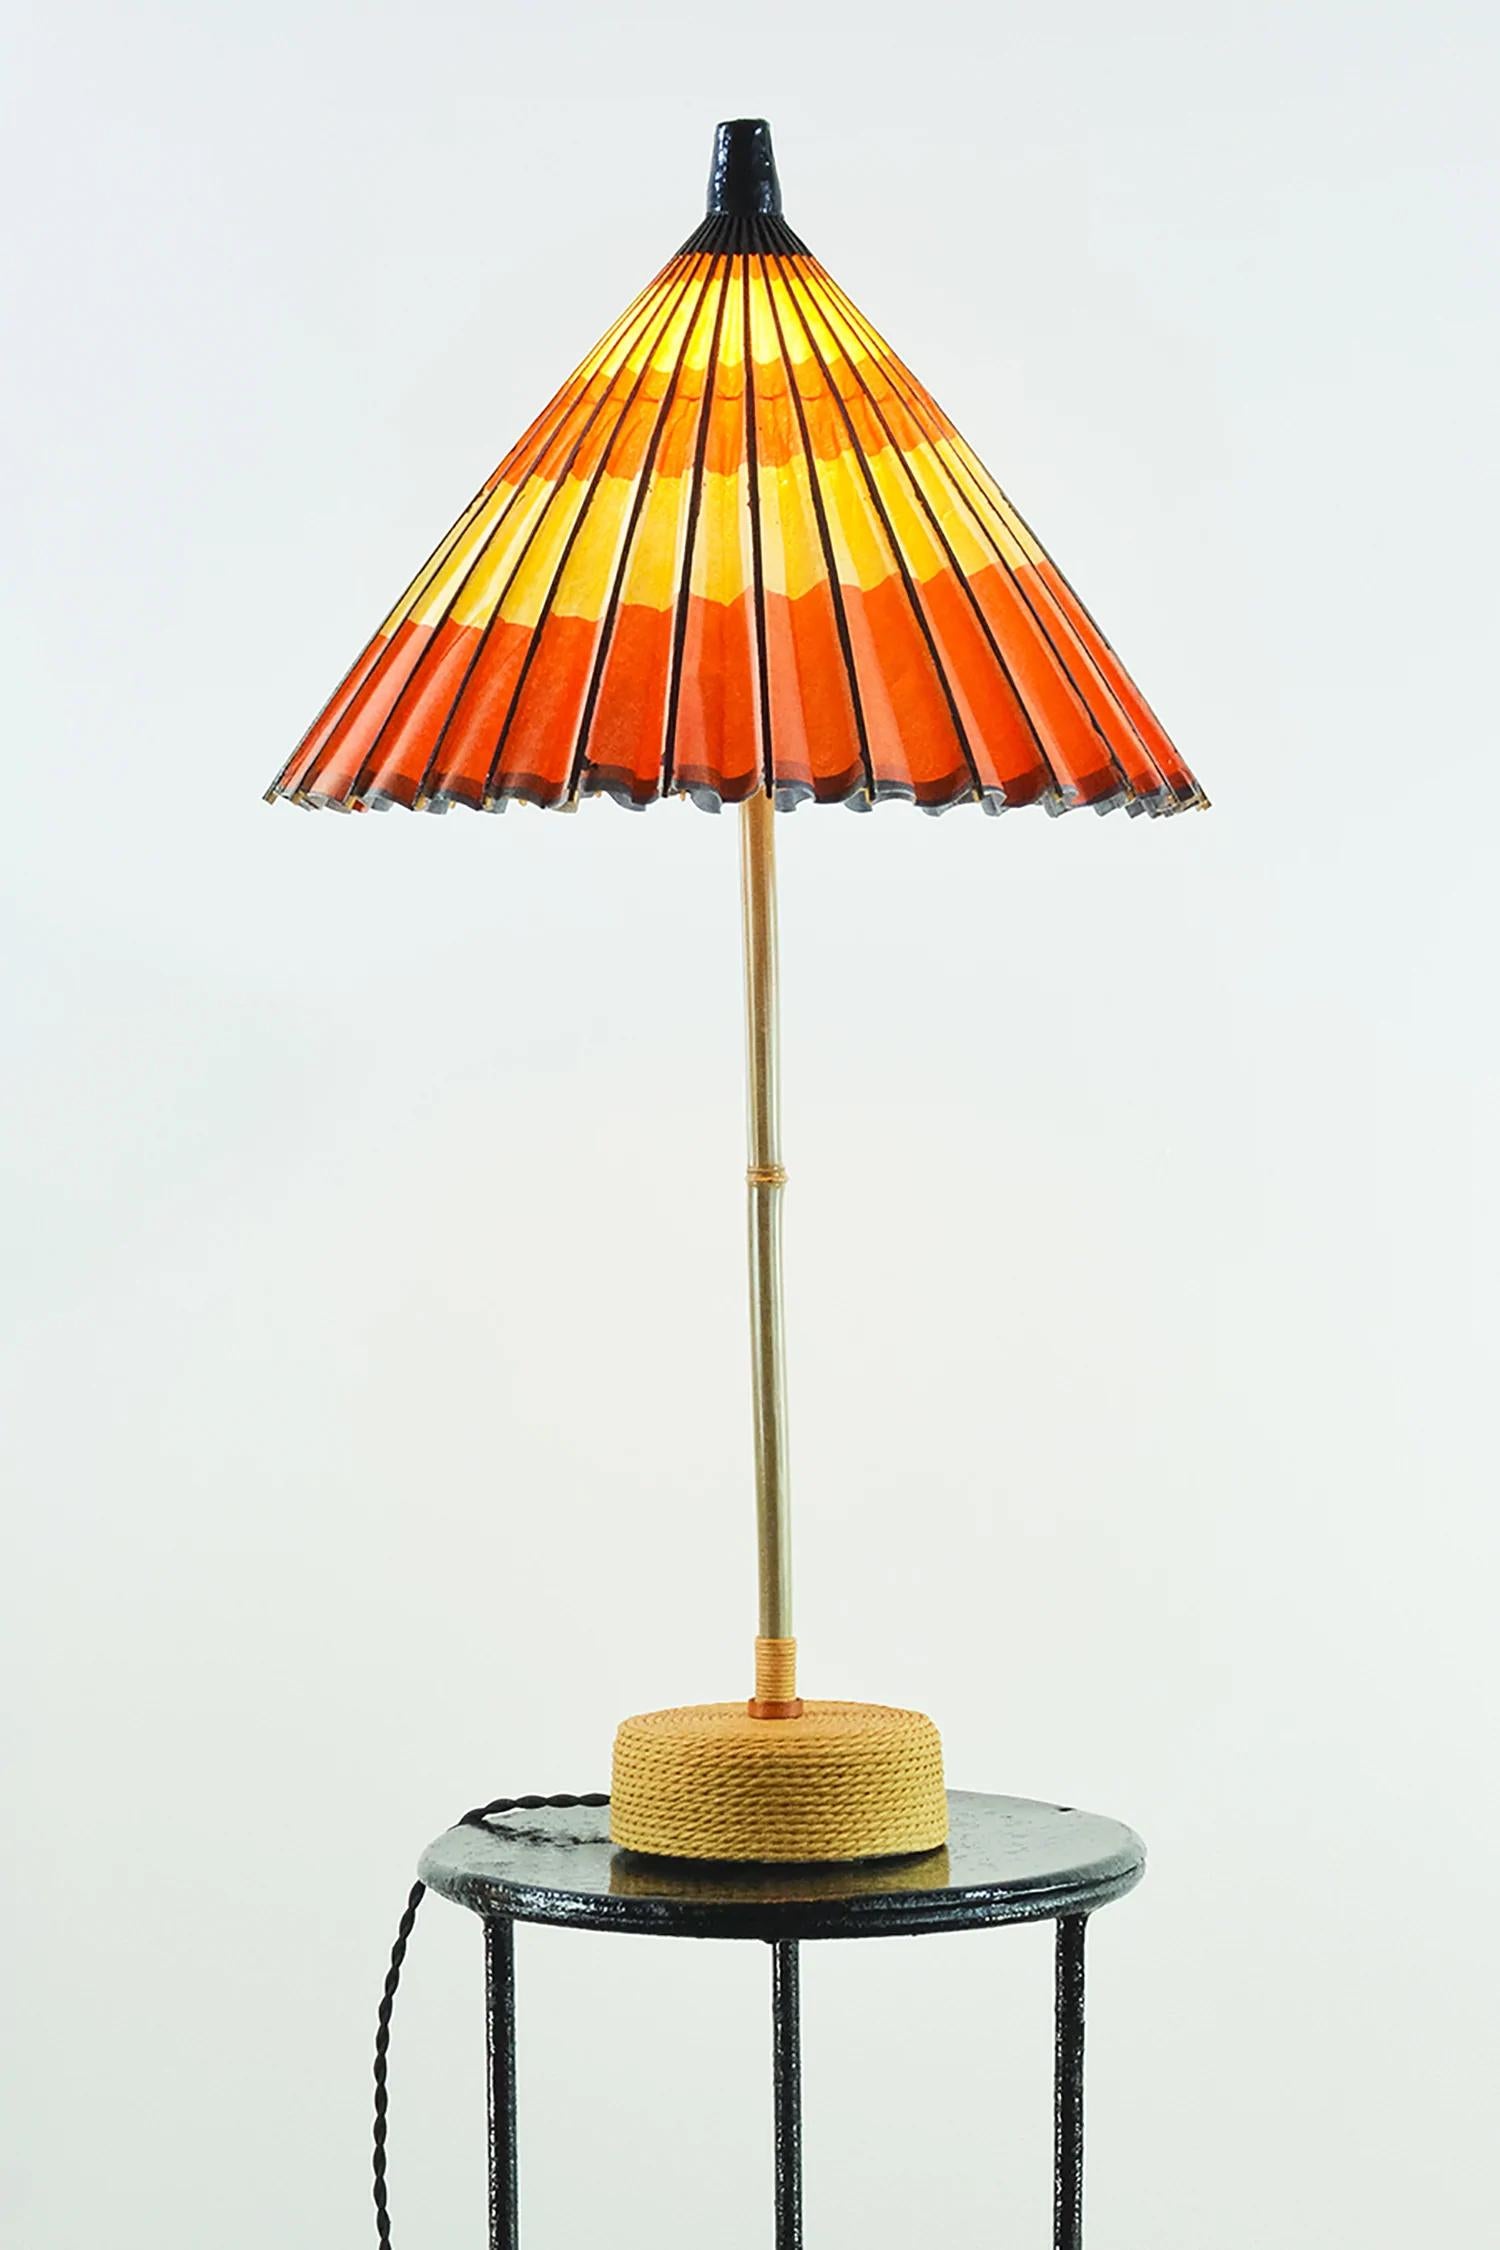 Hand-Crafted 'World's Fair' Bamboo Lamp with Upcycled Parasol Shade by Christopher Tennant